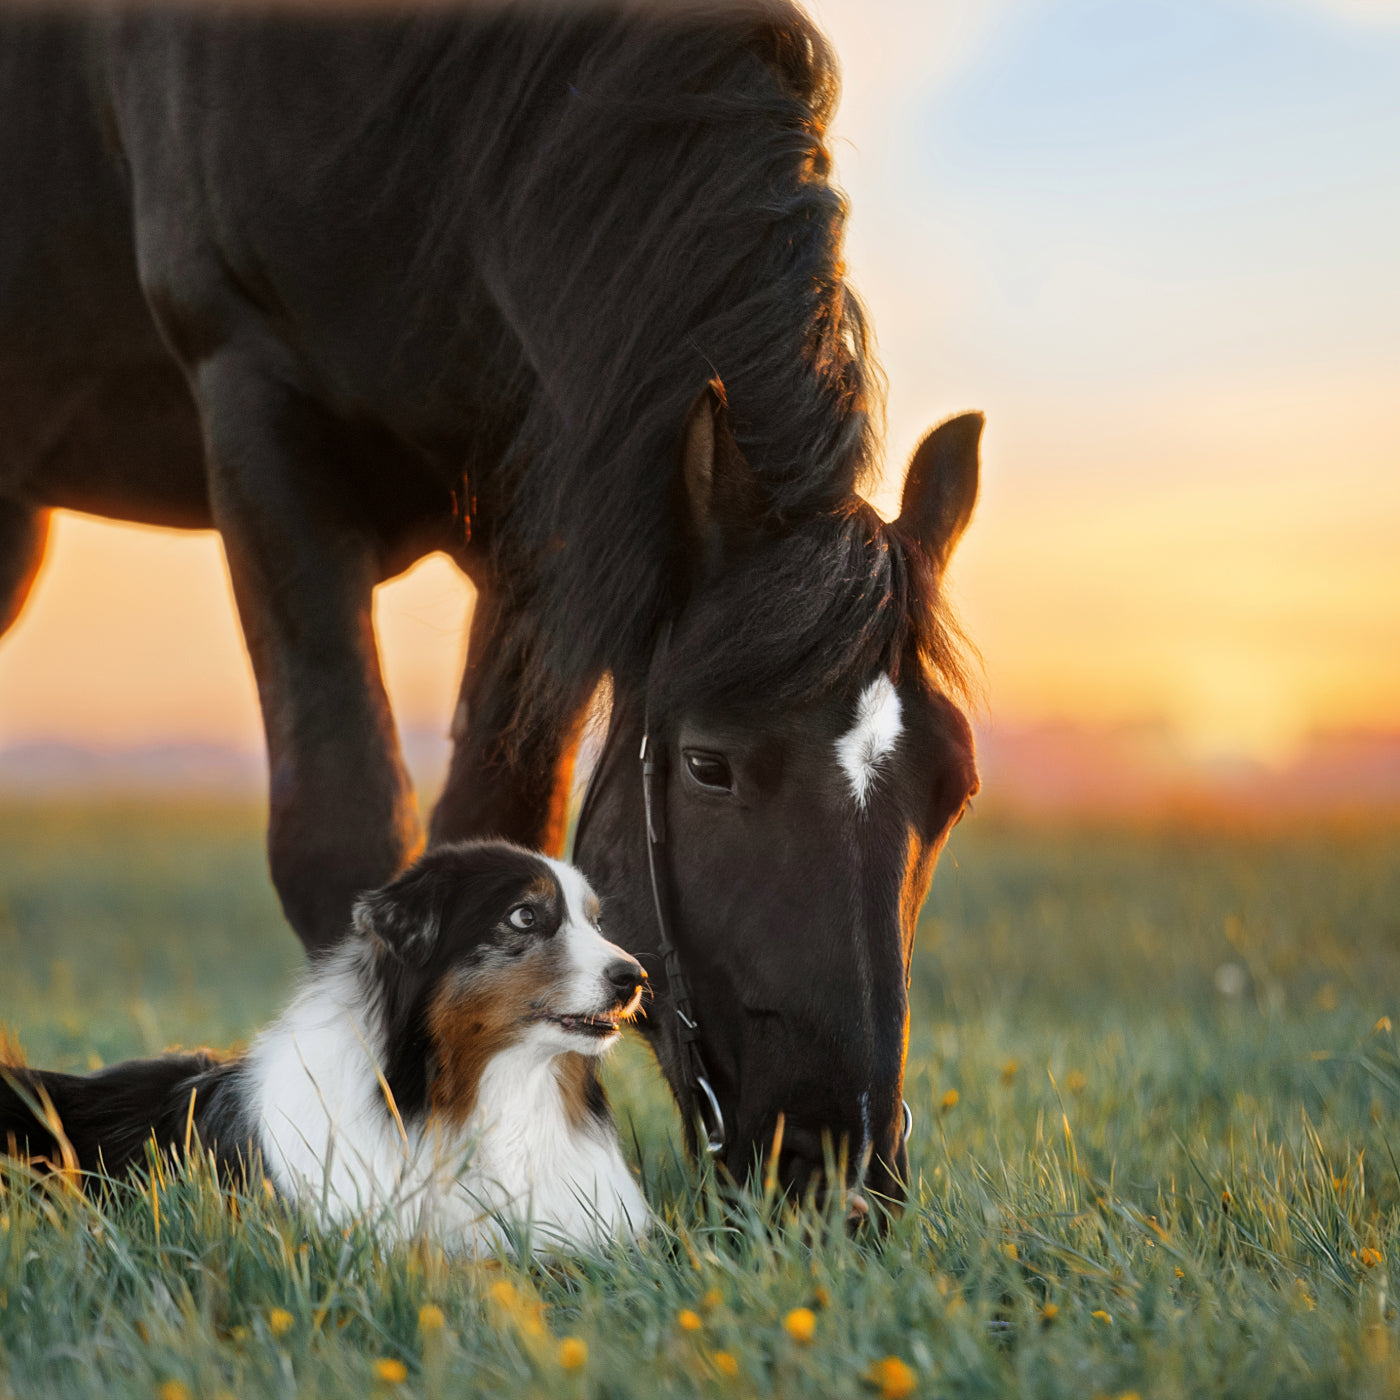 Healthy Dog and Horse in a grassy meadow at sunset. Headley Holistics and Evolved Remedies are unmatched in quality of products, the best horse supplements and holistic dog care